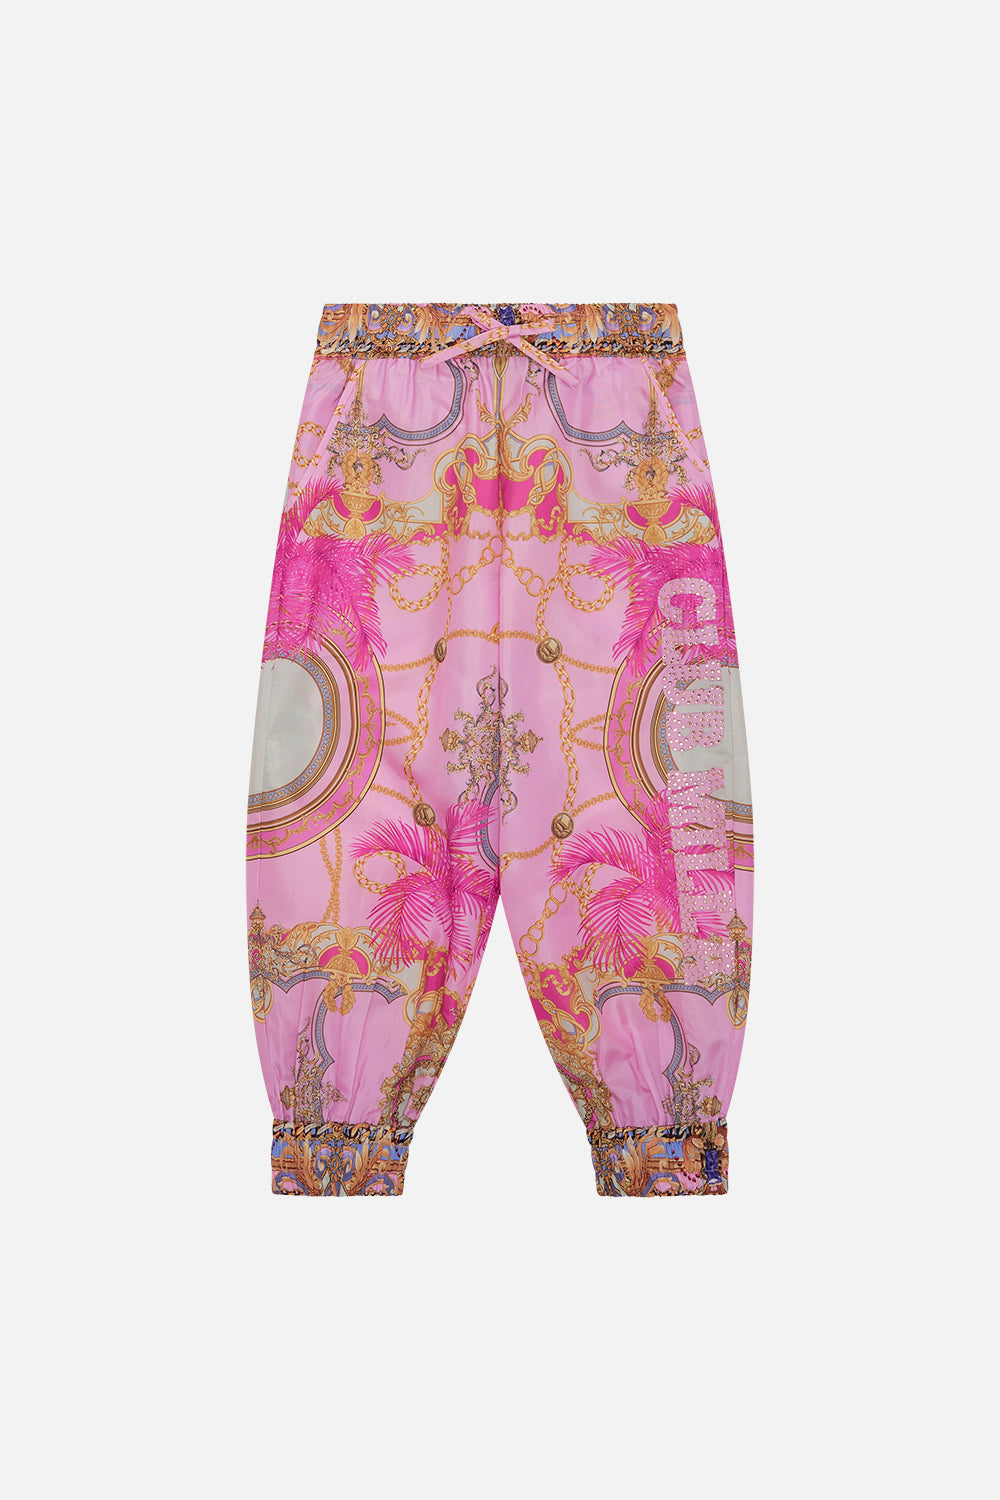 Product view of MILLA By Camilla kids track pant in Tiptoe The Tightrope print